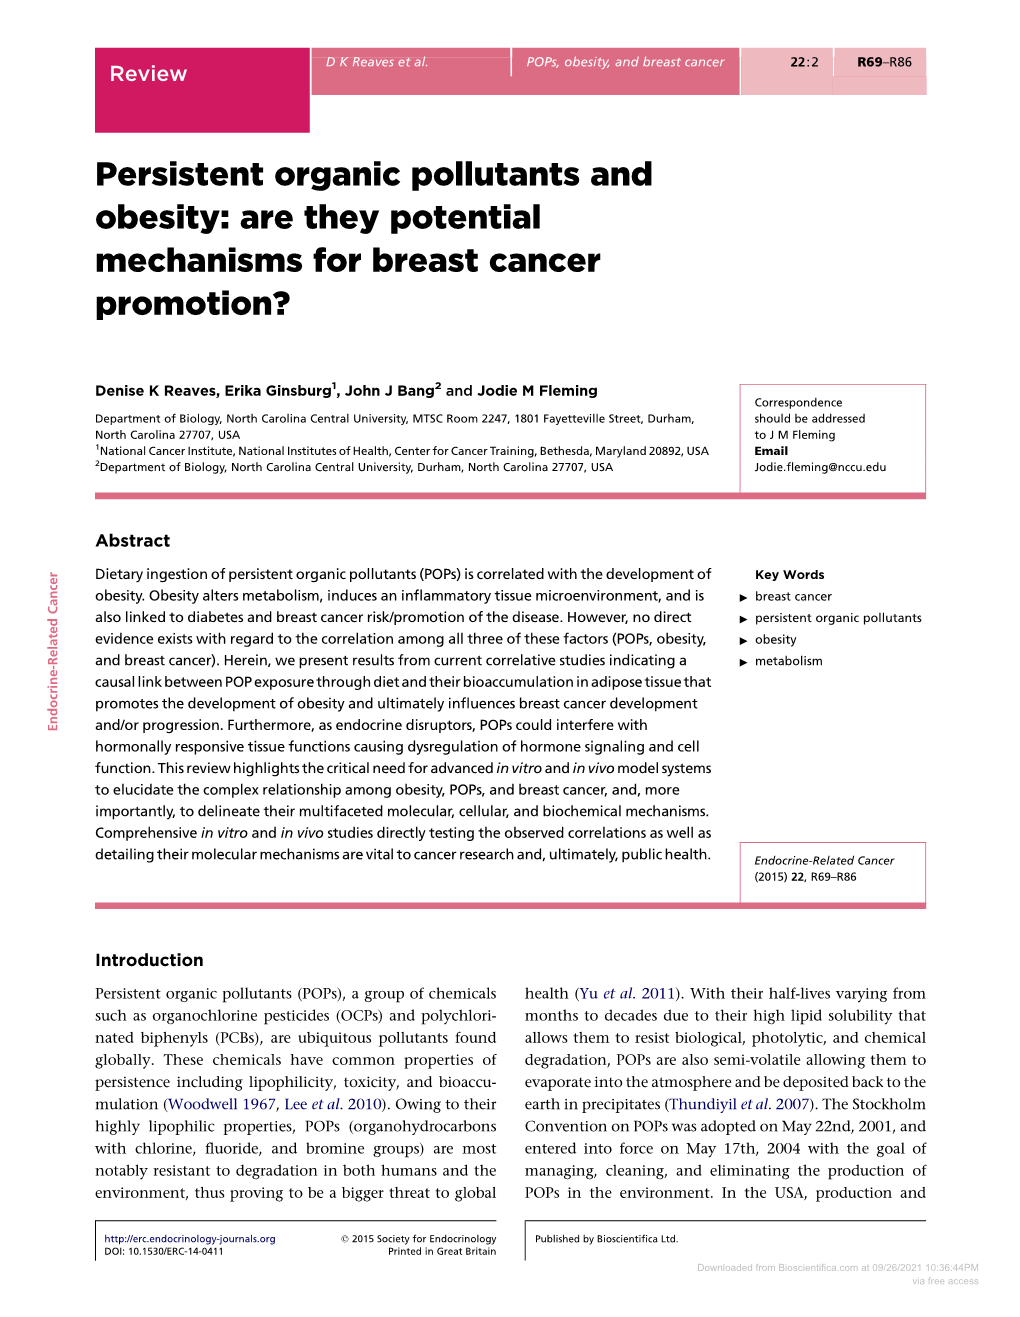 Persistent Organic Pollutants and Obesity: Are They Potential Mechanisms for Breast Cancer Promotion?